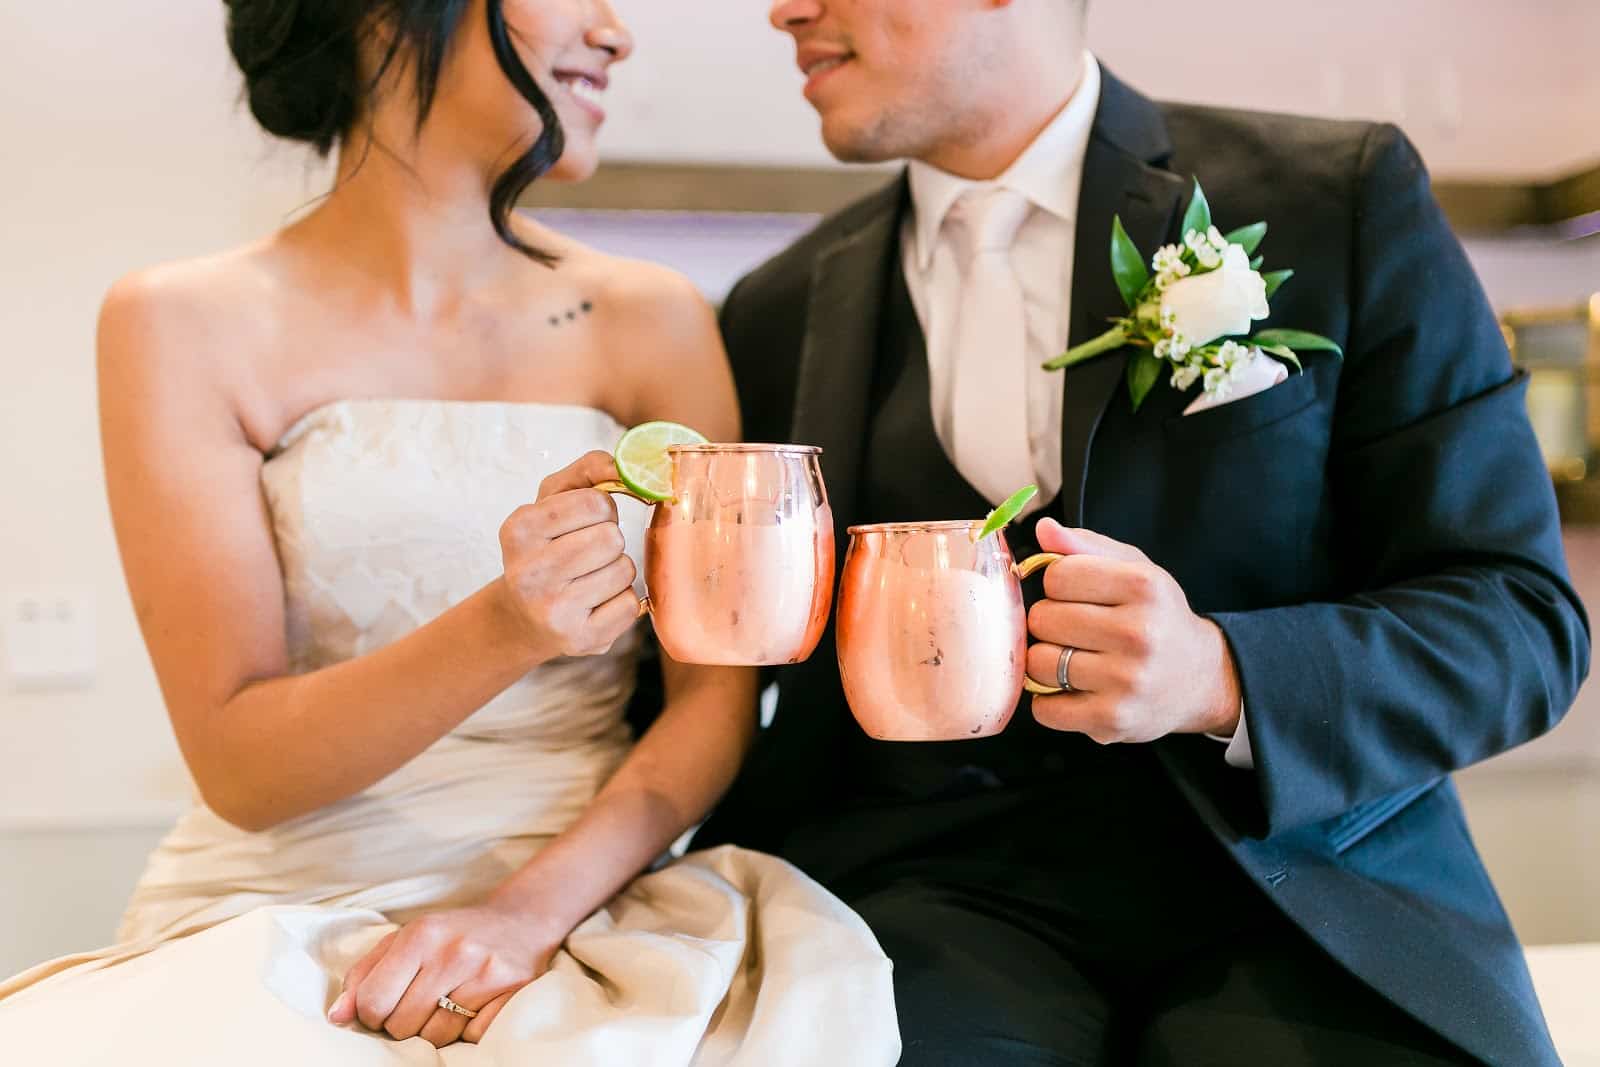 Most Popular Drinks at a Wedding